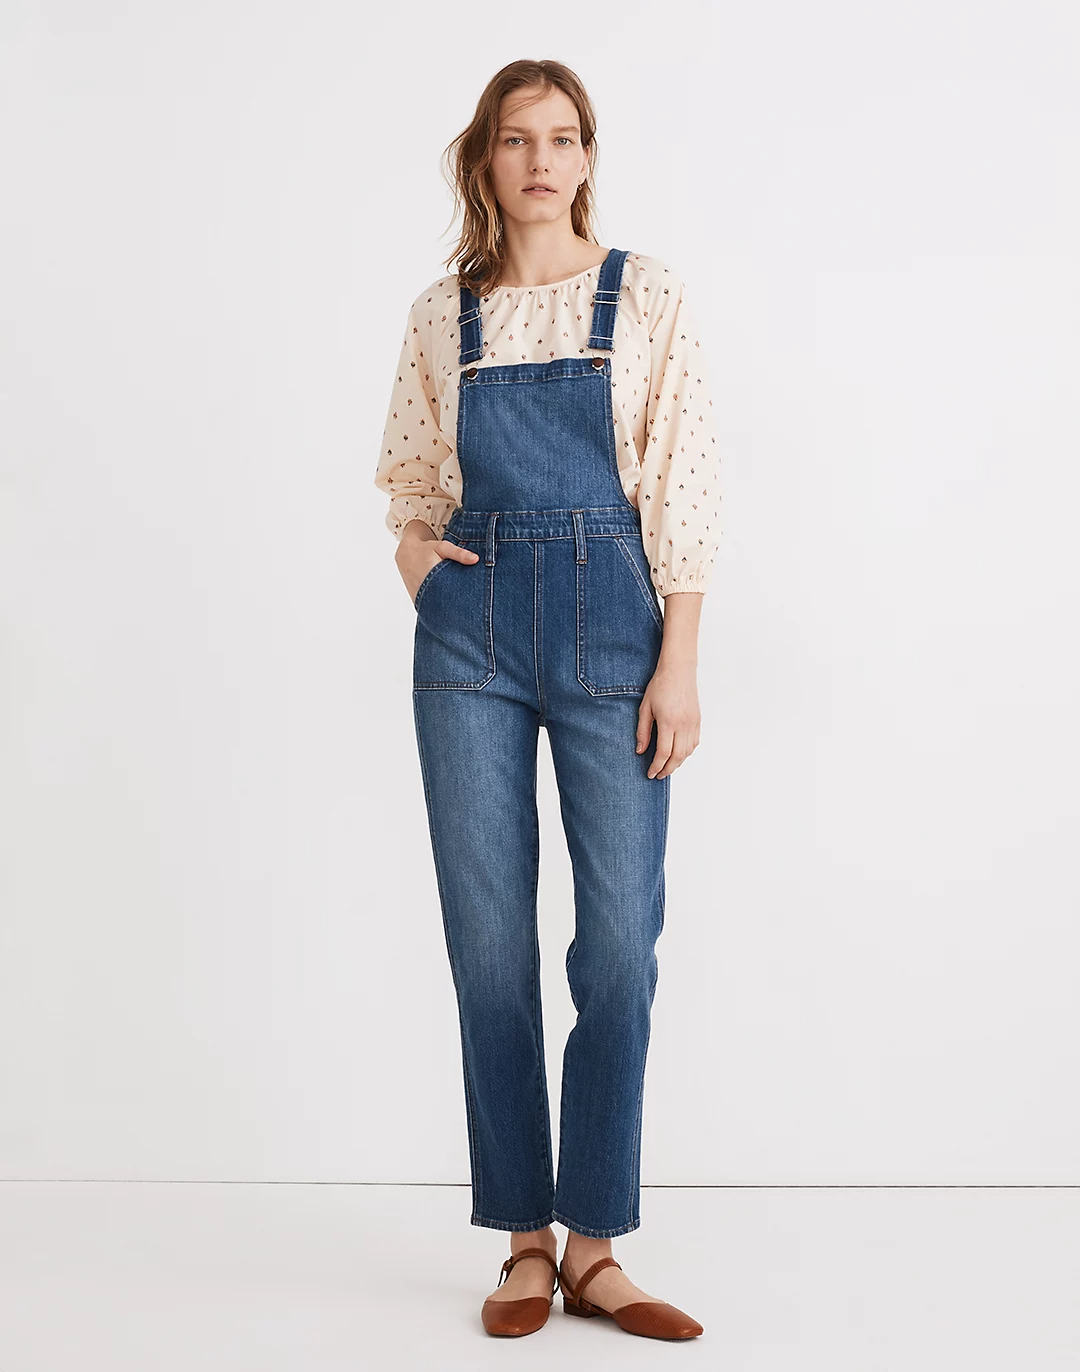 Madewell + Stovepipe Overalls in Cosman Wash